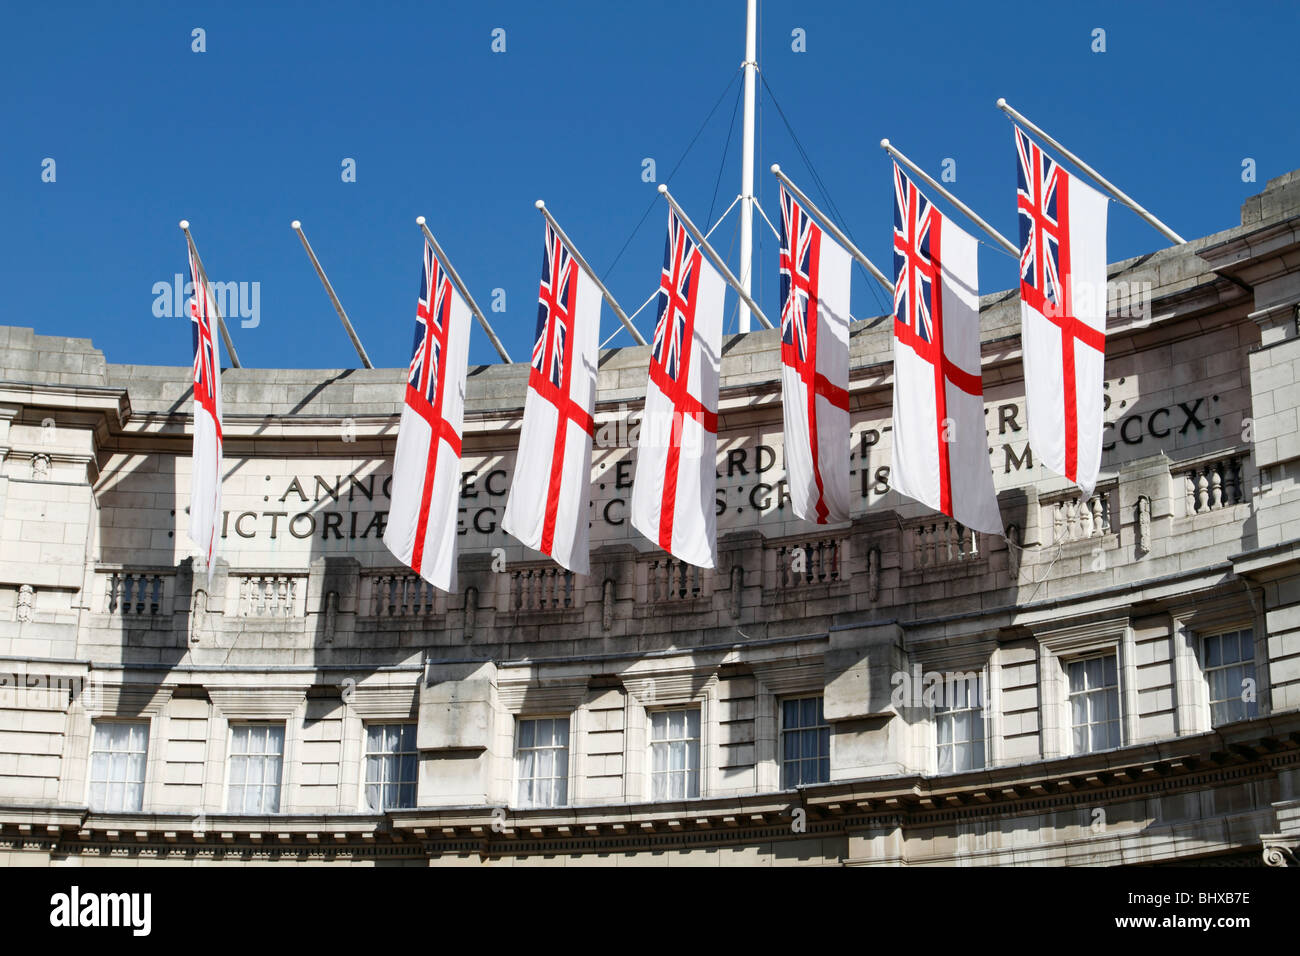 Flags hanging above Admiralty Arch at the entrance to the Mall from Trafalgar Square, London Stock Photo